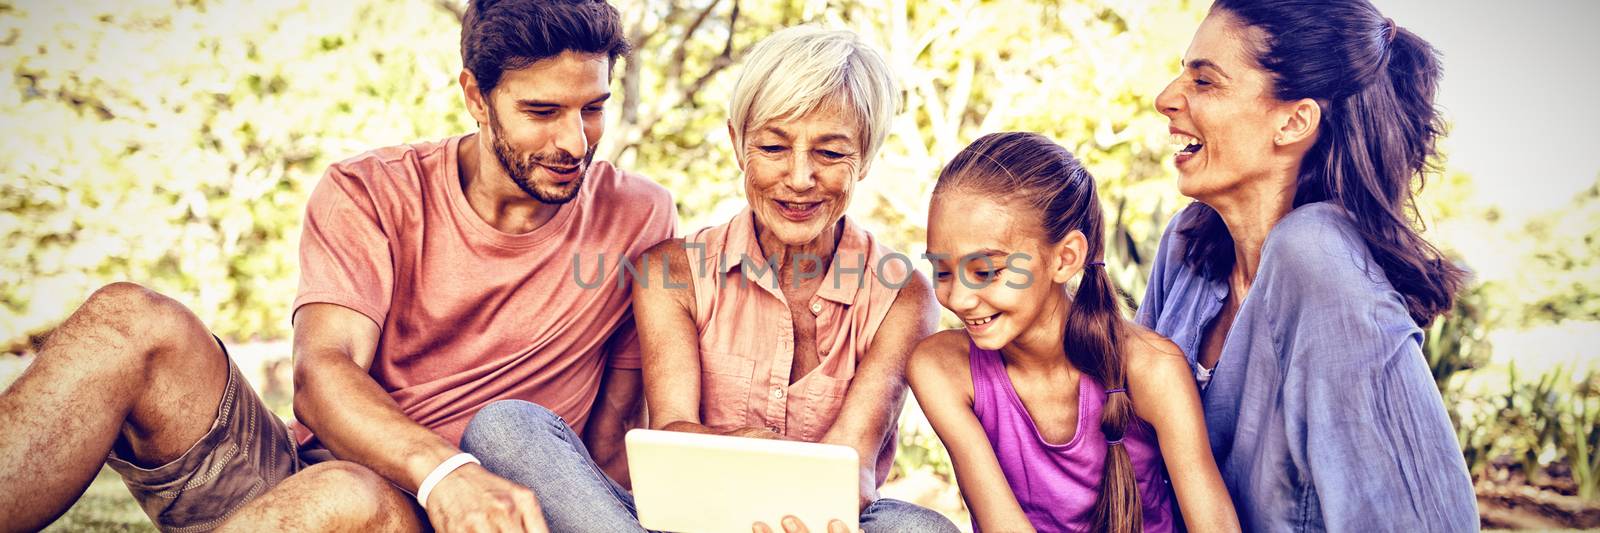 Family looking at digital tablet in the park by Wavebreakmedia